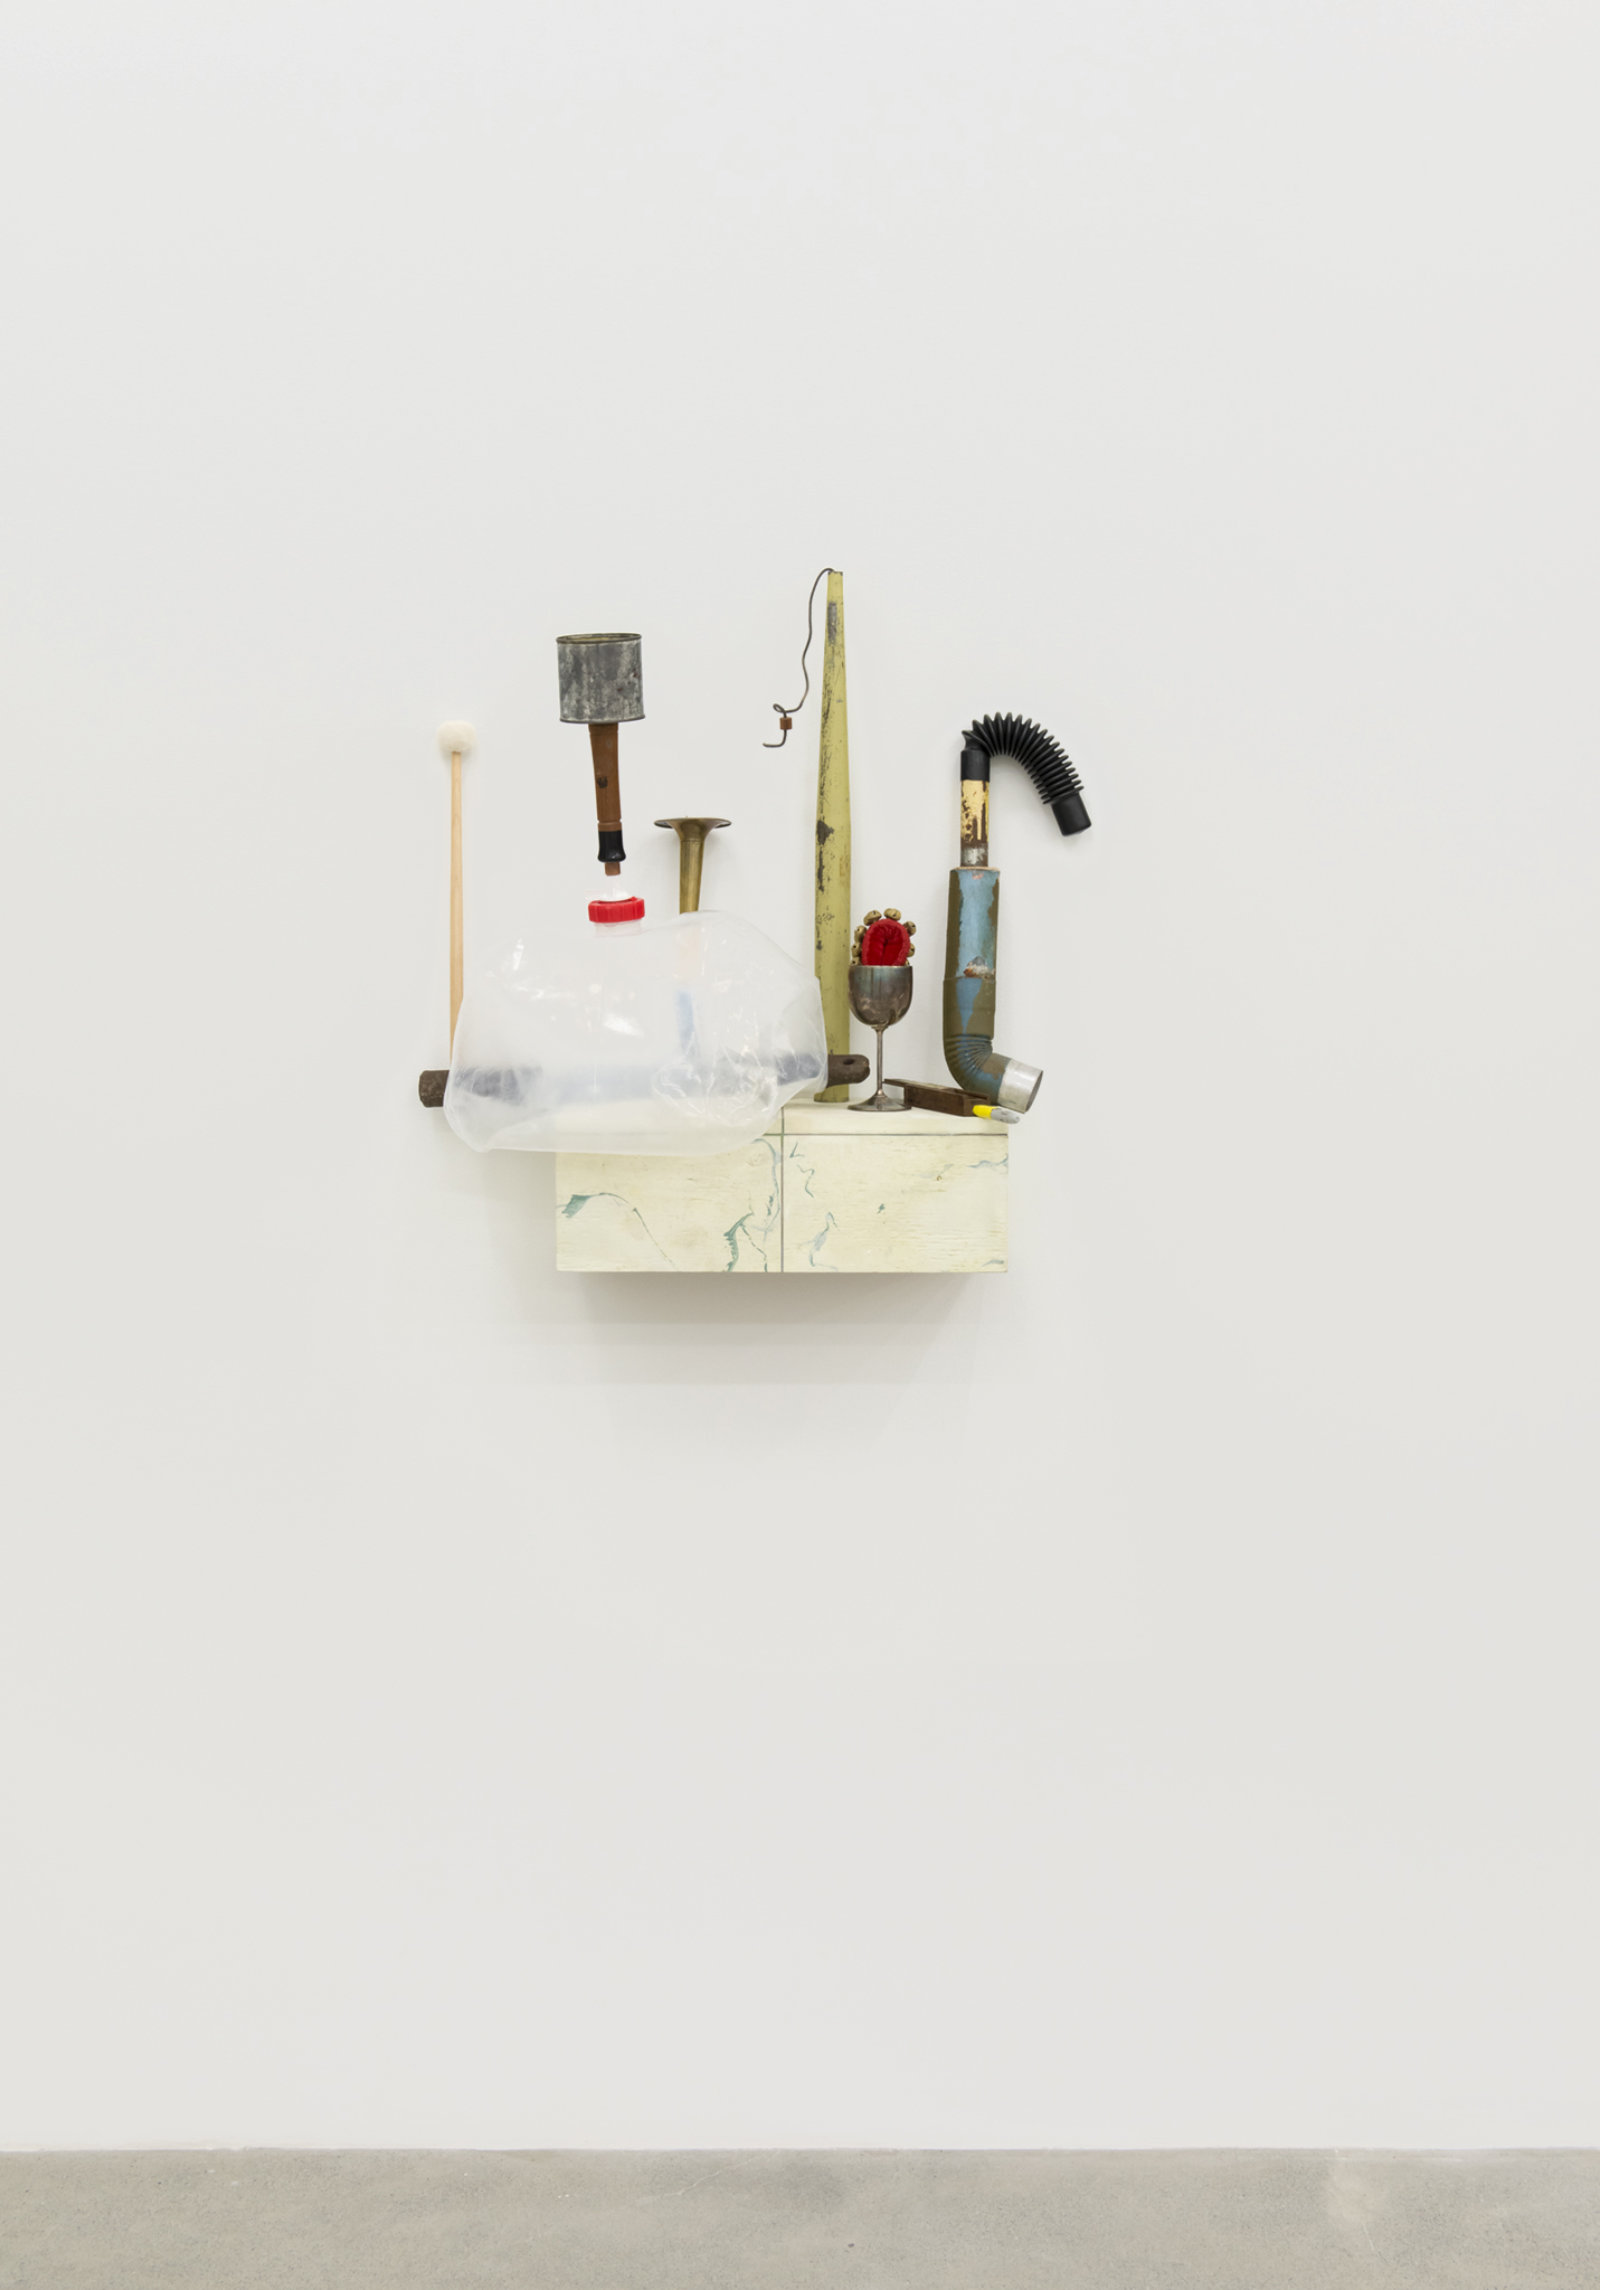 Ashes Withyman, Compass, Furnas, Altar, River, Cetus, Musca, Cup, 2017–2018, water jug, sash weight, mallet, bells, brass horn, hunting call parts, drainpipe, chair leg, silver cup, marker, electrical parts, painted plywood, 29 x 25 x 12 in. (72 x 64 x 31 cm)